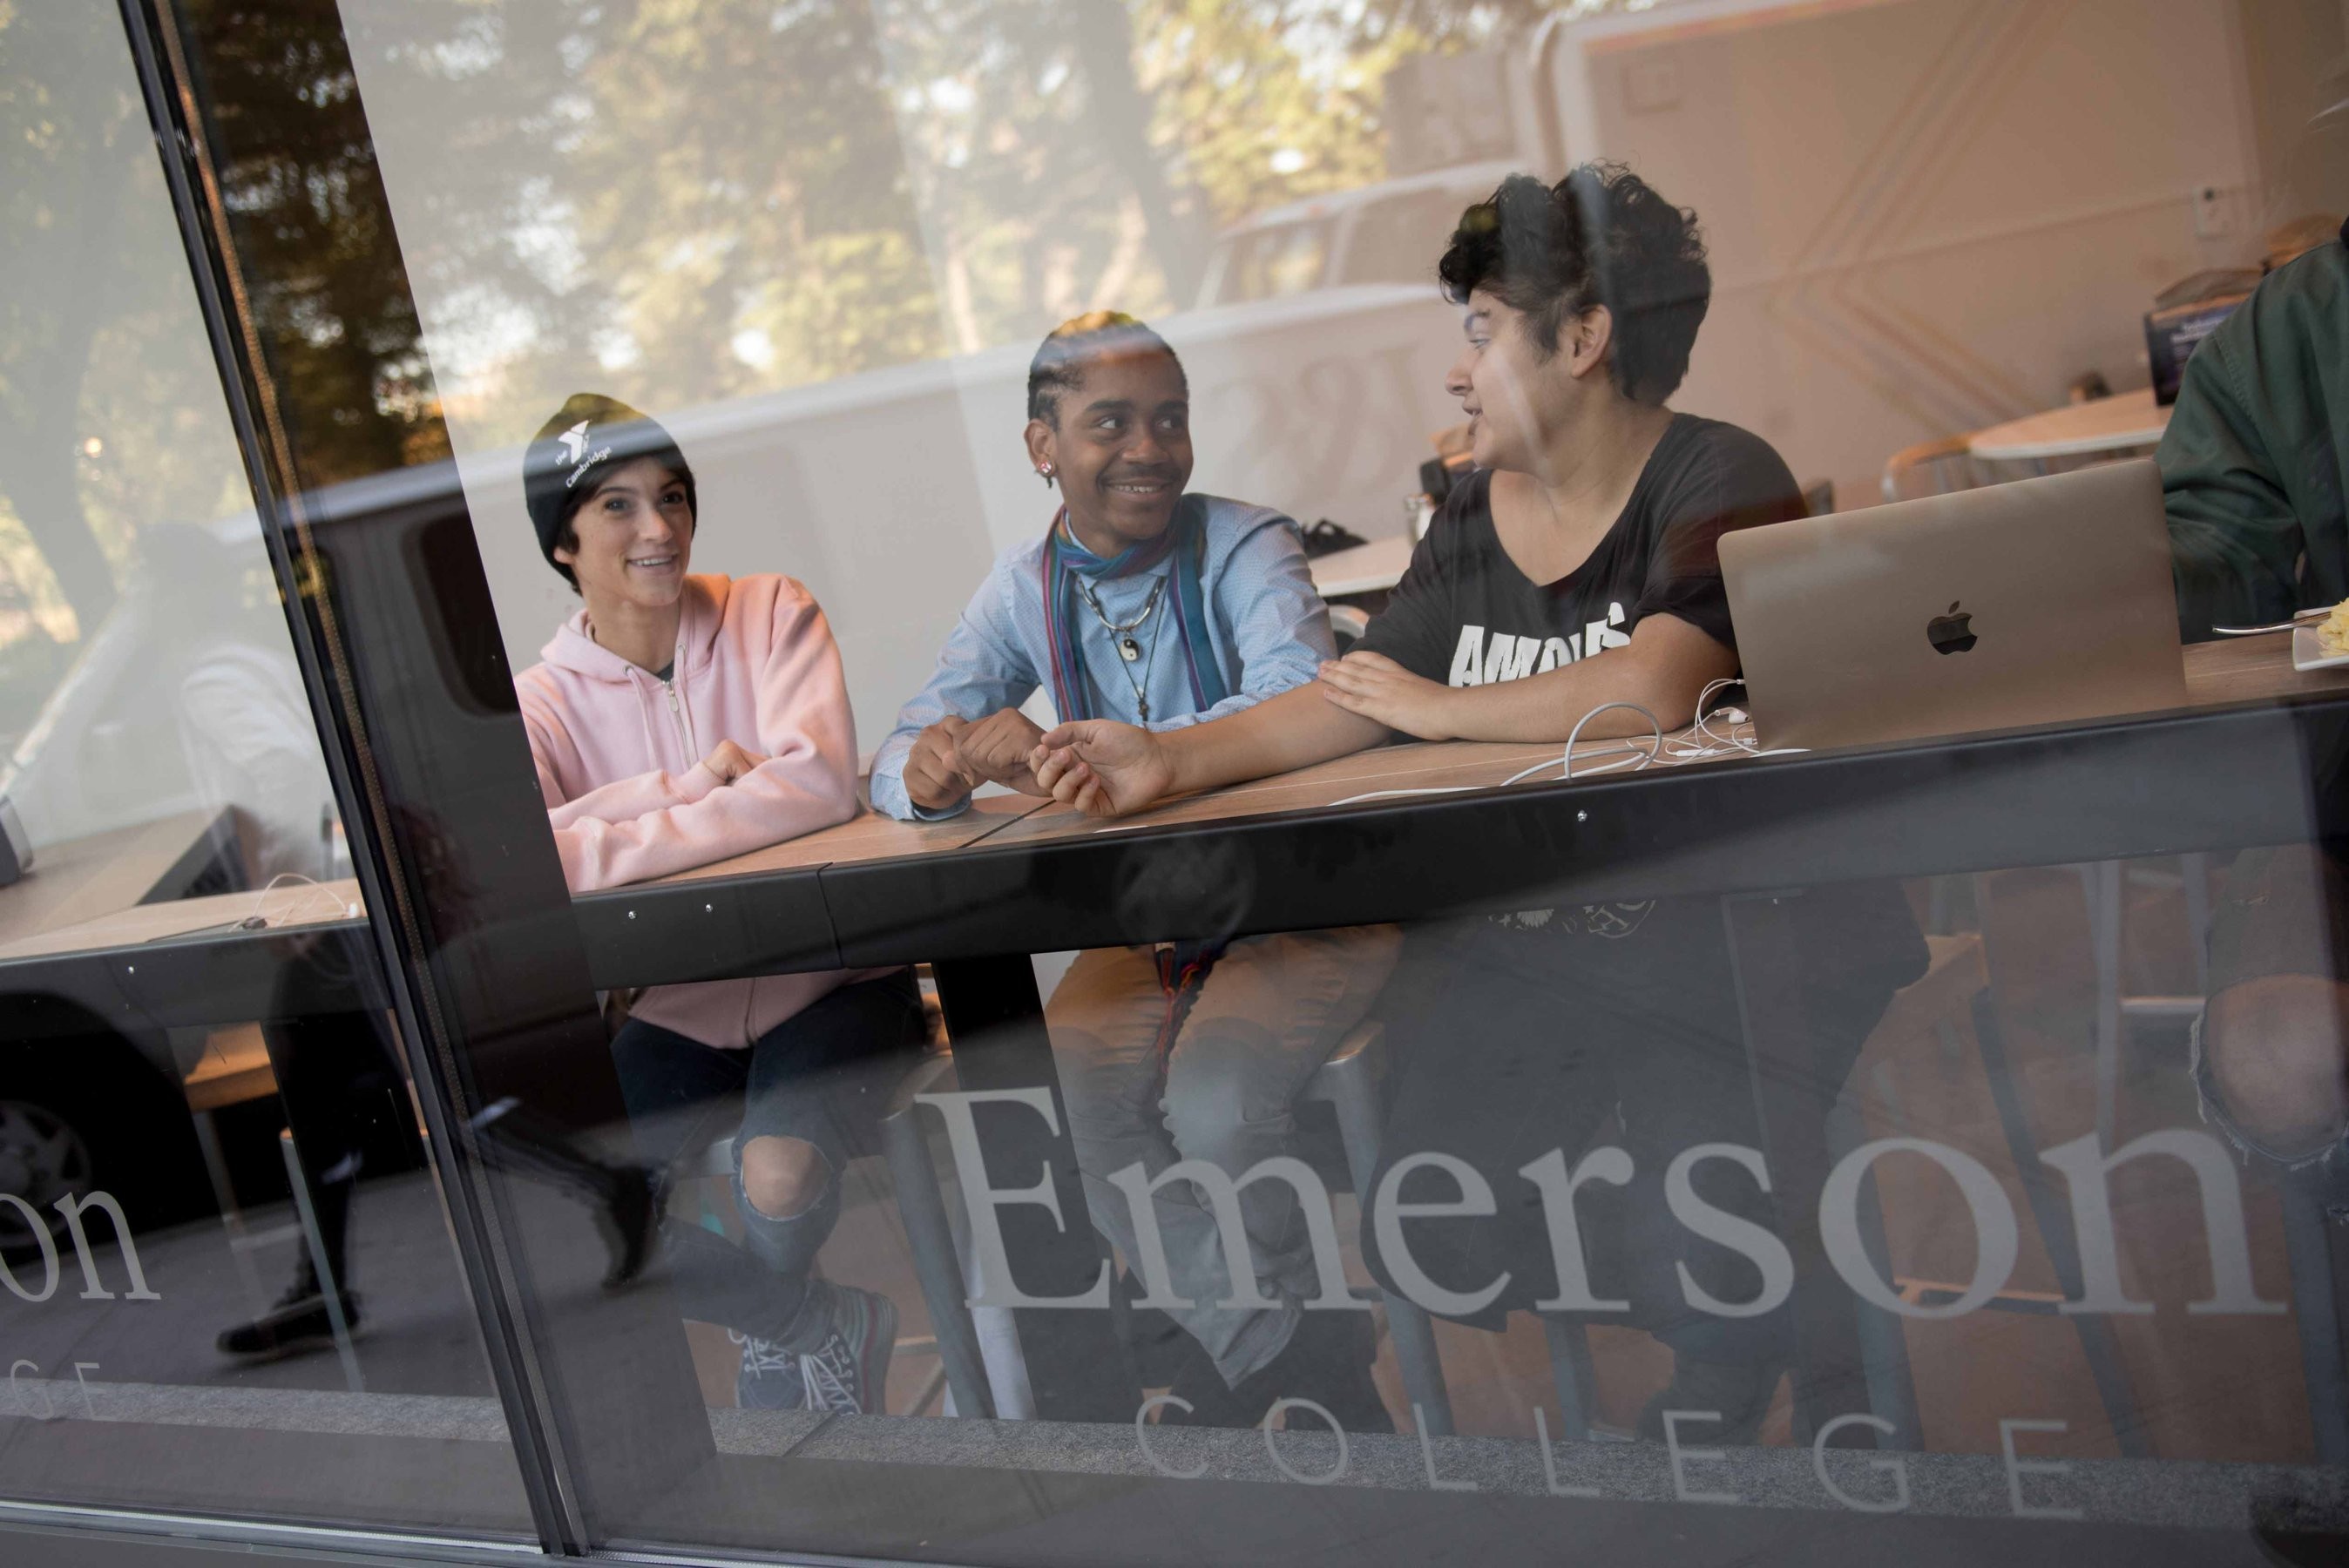 Students at Emerson College socialize next to a window in an academic building